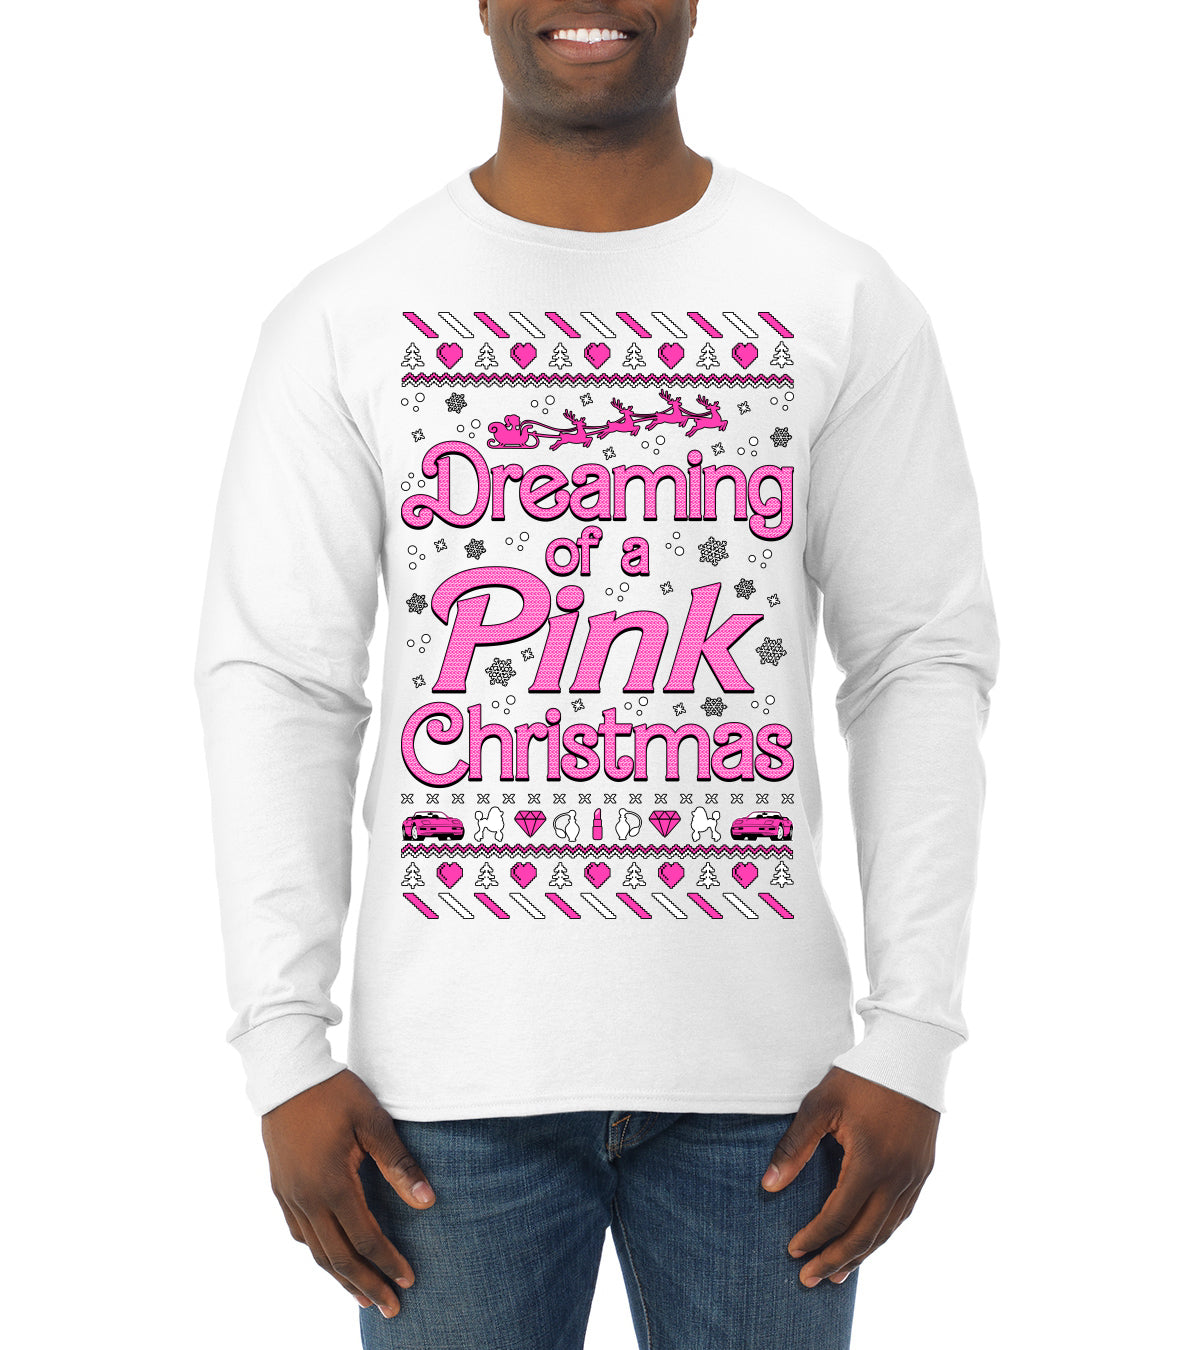 Dreaming Of A Pink Chirstmas Girly Woman Movie Party Ugly Christmas Sweater Mens Long Sleeve Shirt